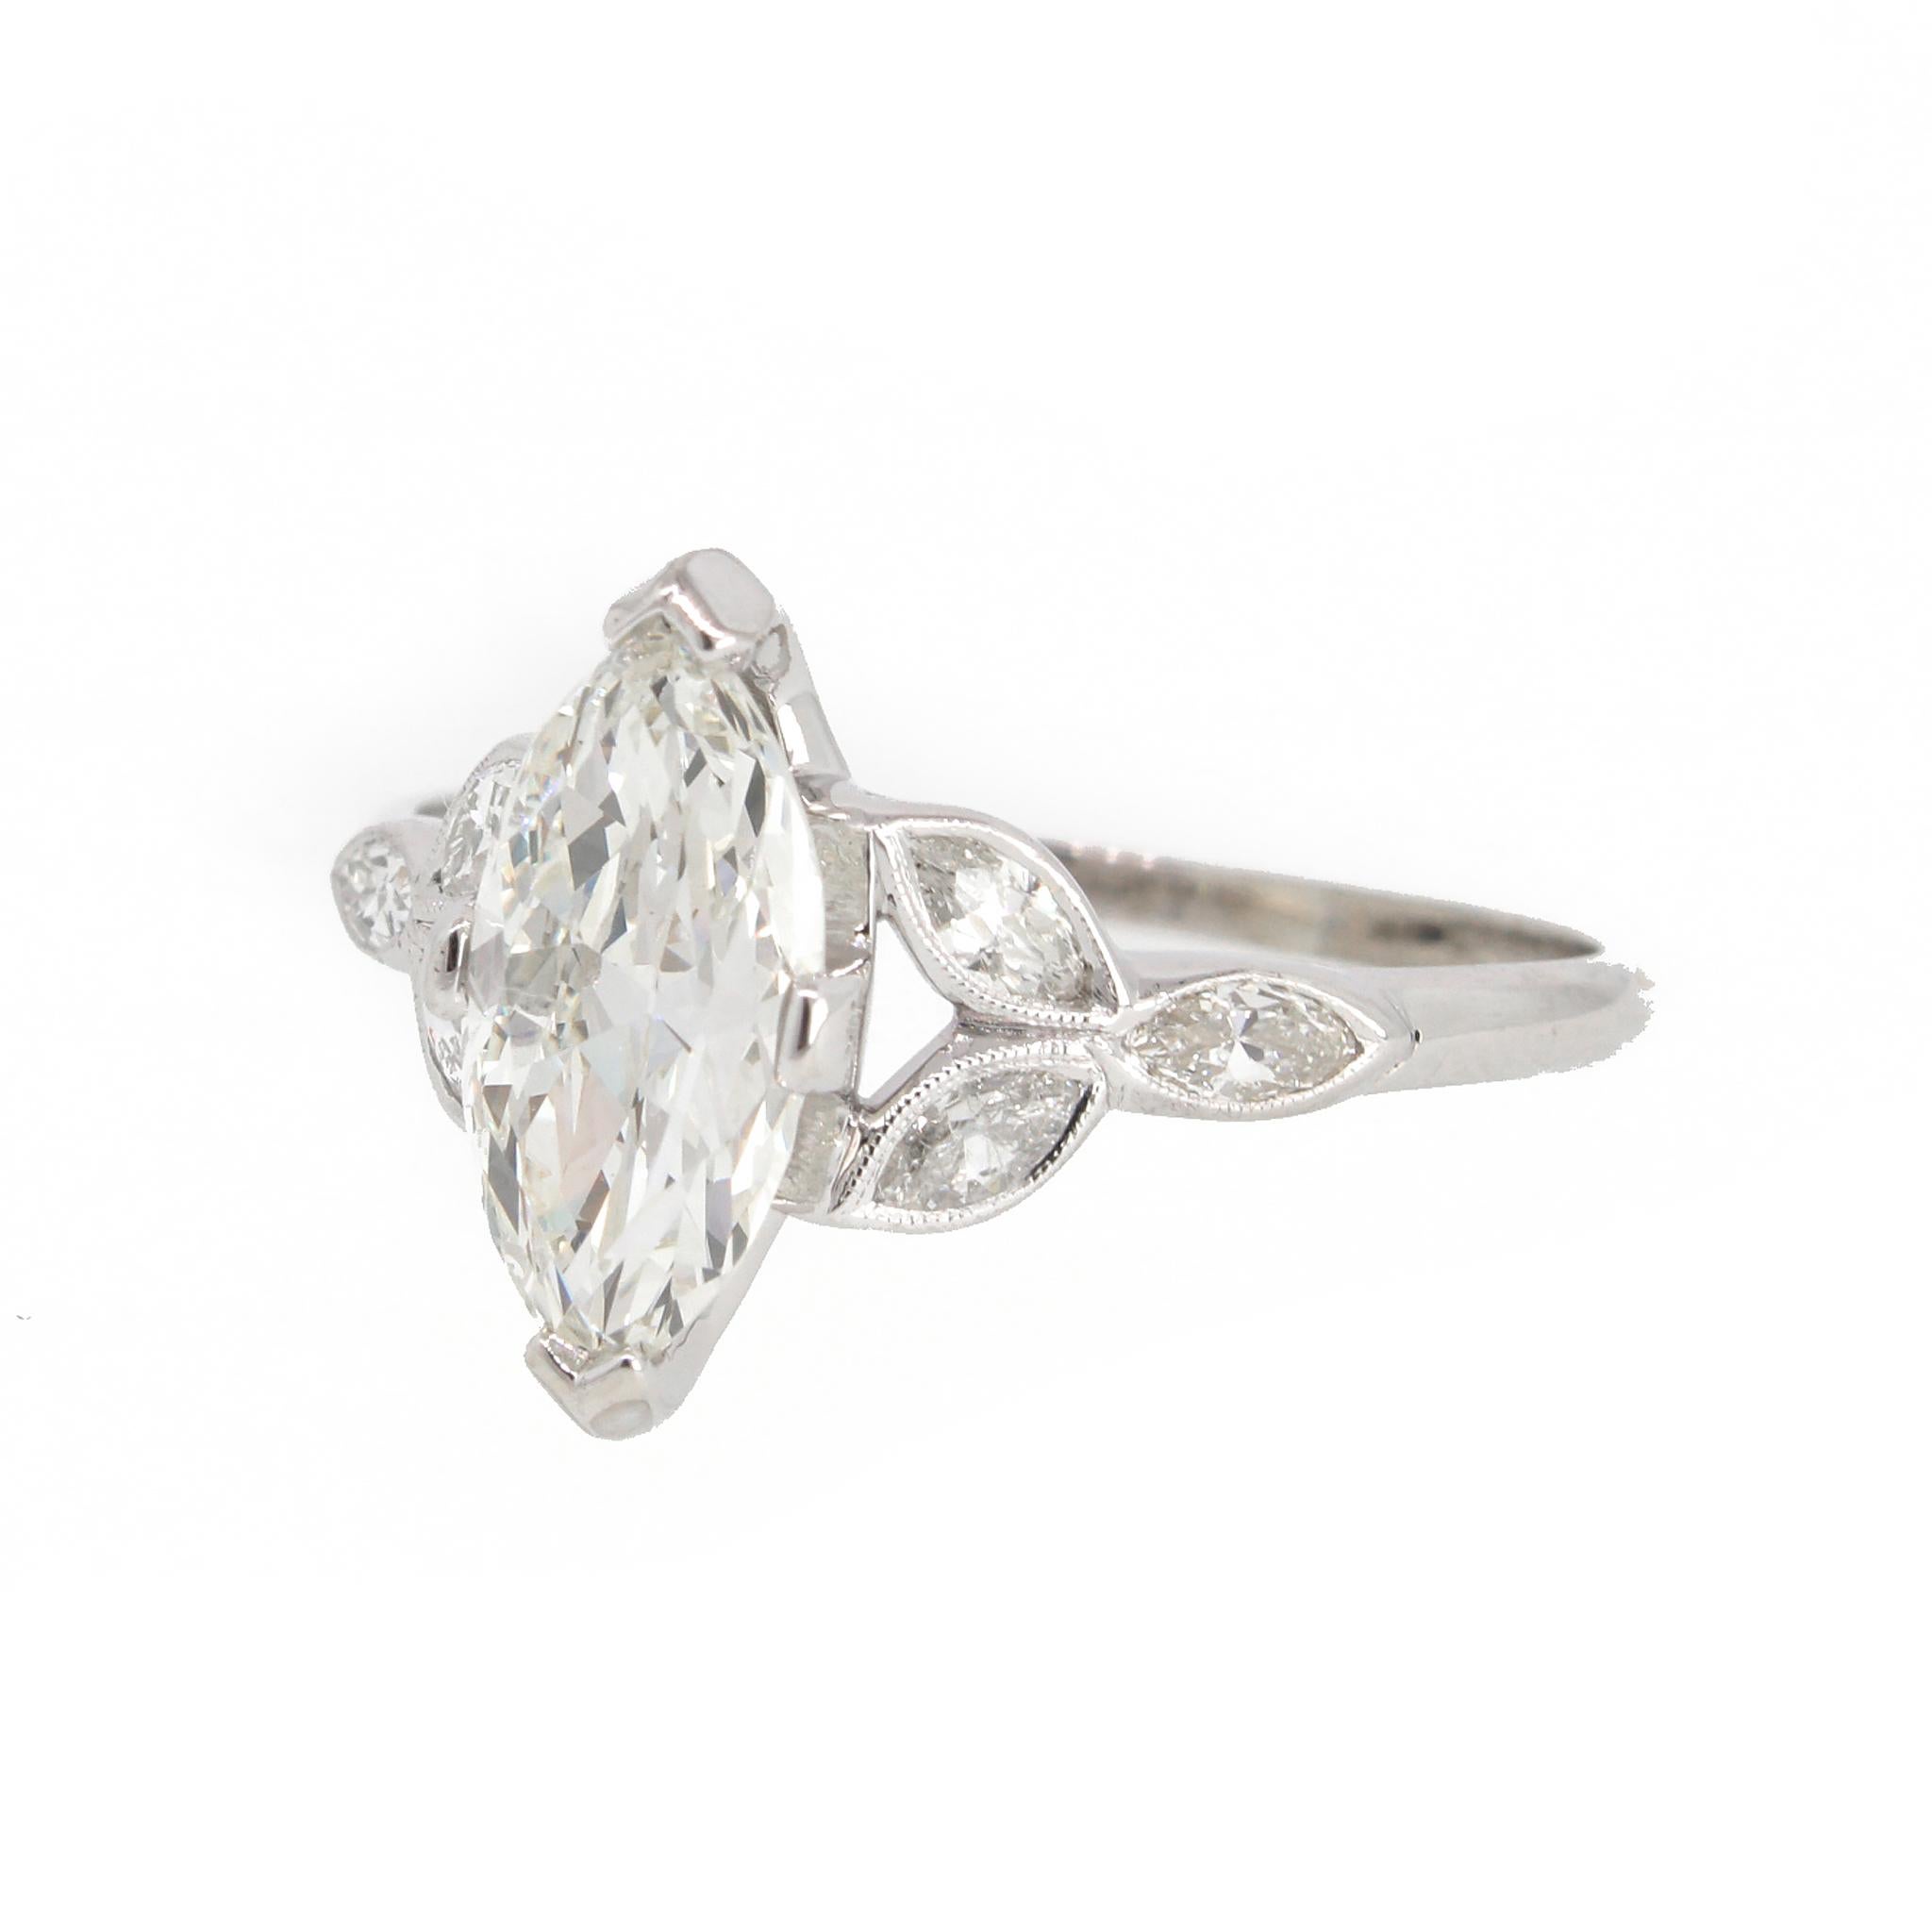 Platinum
GIA Report No. 1457885536
Marquise Cut Diamond: 1.39 ct
Color: J
Clarity: VS2
Ring Size: 8.5 (resizeable)